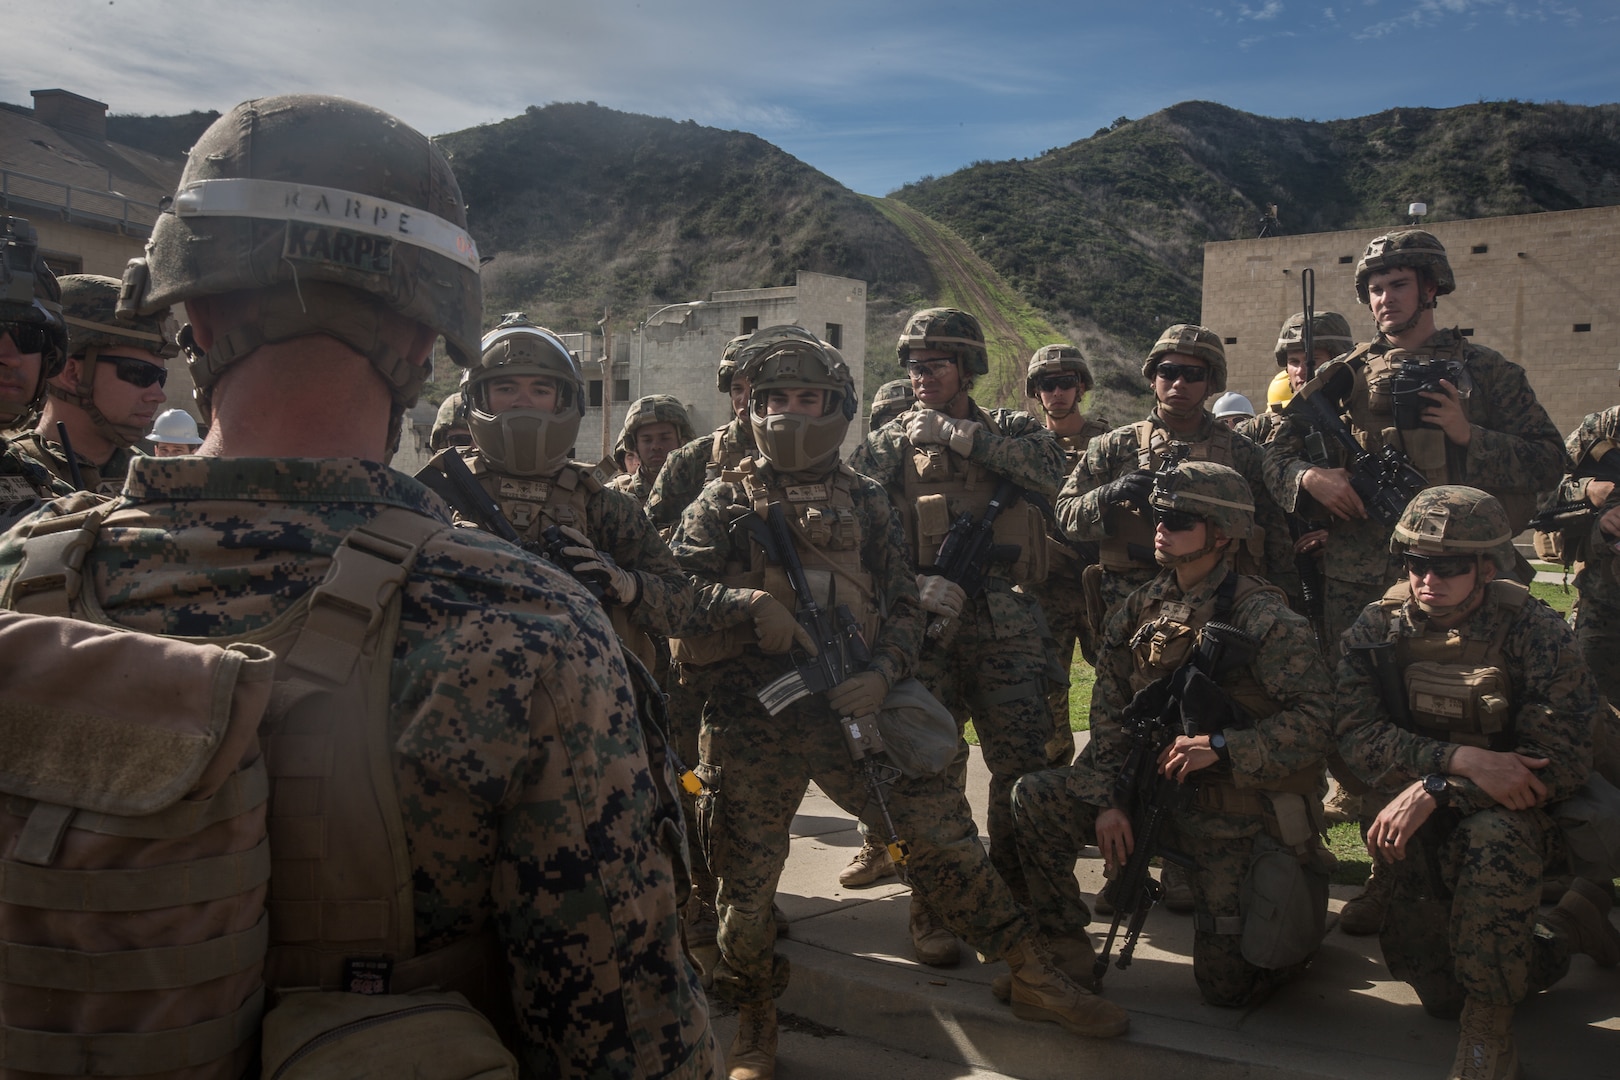 U.S. Marines with 3rd Battalion, 4th Marine Regiment, 1st Marine Division test Step In Visor and Low Profile Mandible during Urban Advanced Naval Technology Exercise 2018 (ANTX-18) at Marine Corps Base Camp Pendleton, California, March 21, 2018. The Marines have been provided the opportunity to assess the operational utility of emerging technologies and engineering innovations that improve the Marine’s survivability, lethality and connectivity in complex urban environments. (U.S. Marine Corps photo by Lance Cpl. Rhita Daniel)